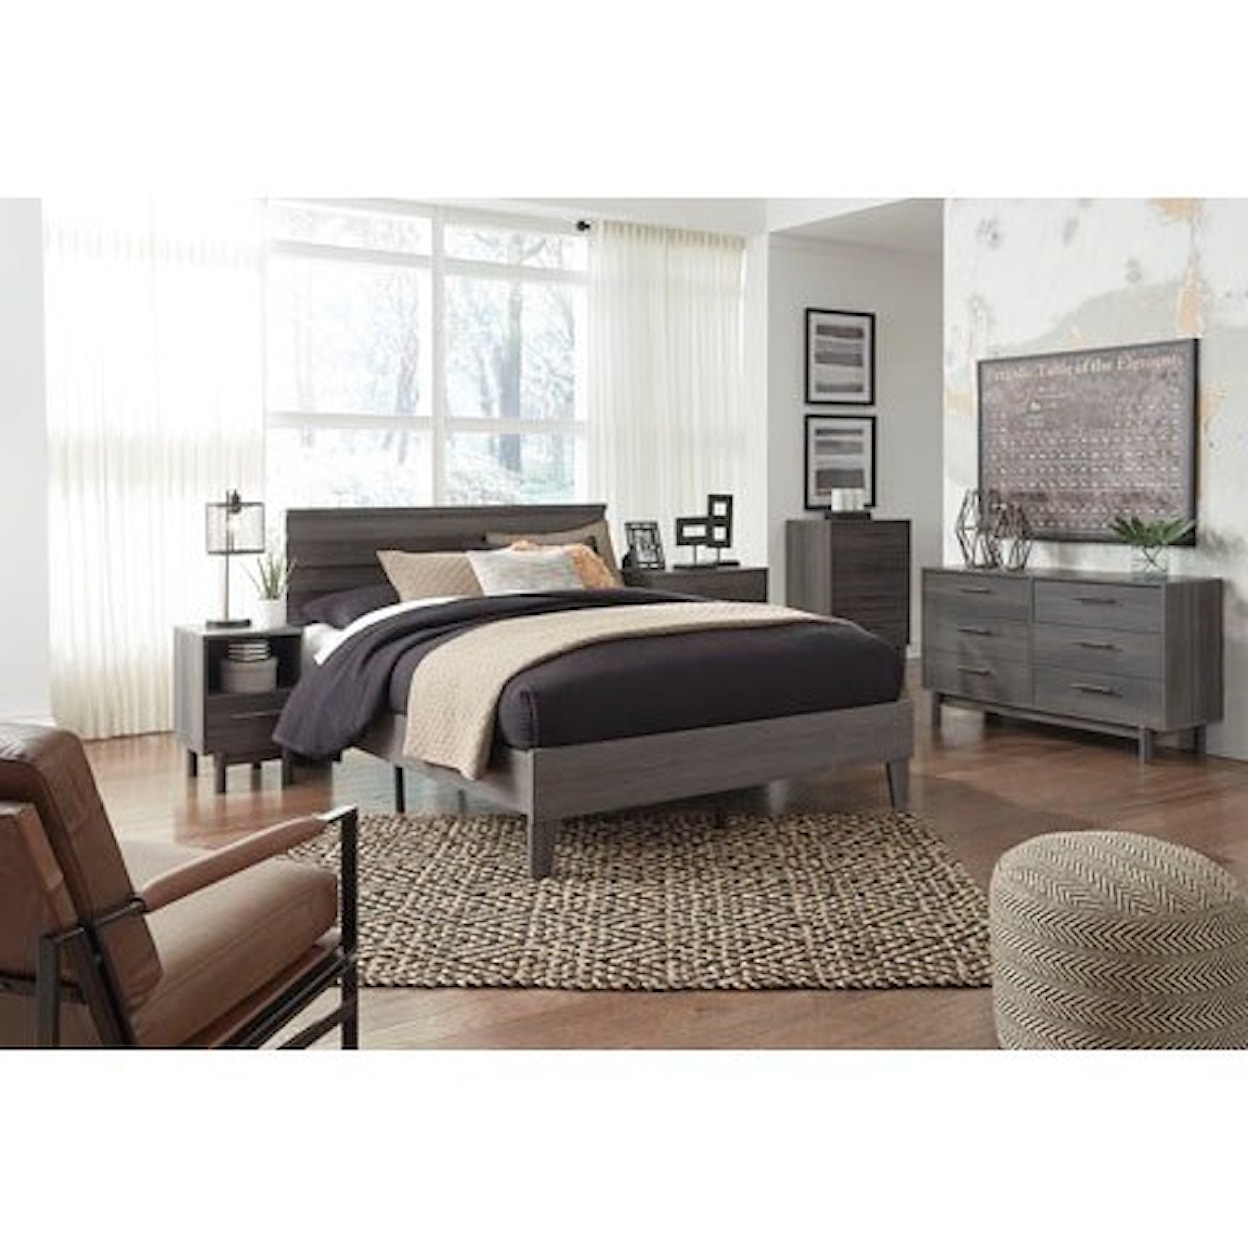 Signature Design by Ashley Brymont Queen Bedroom Group